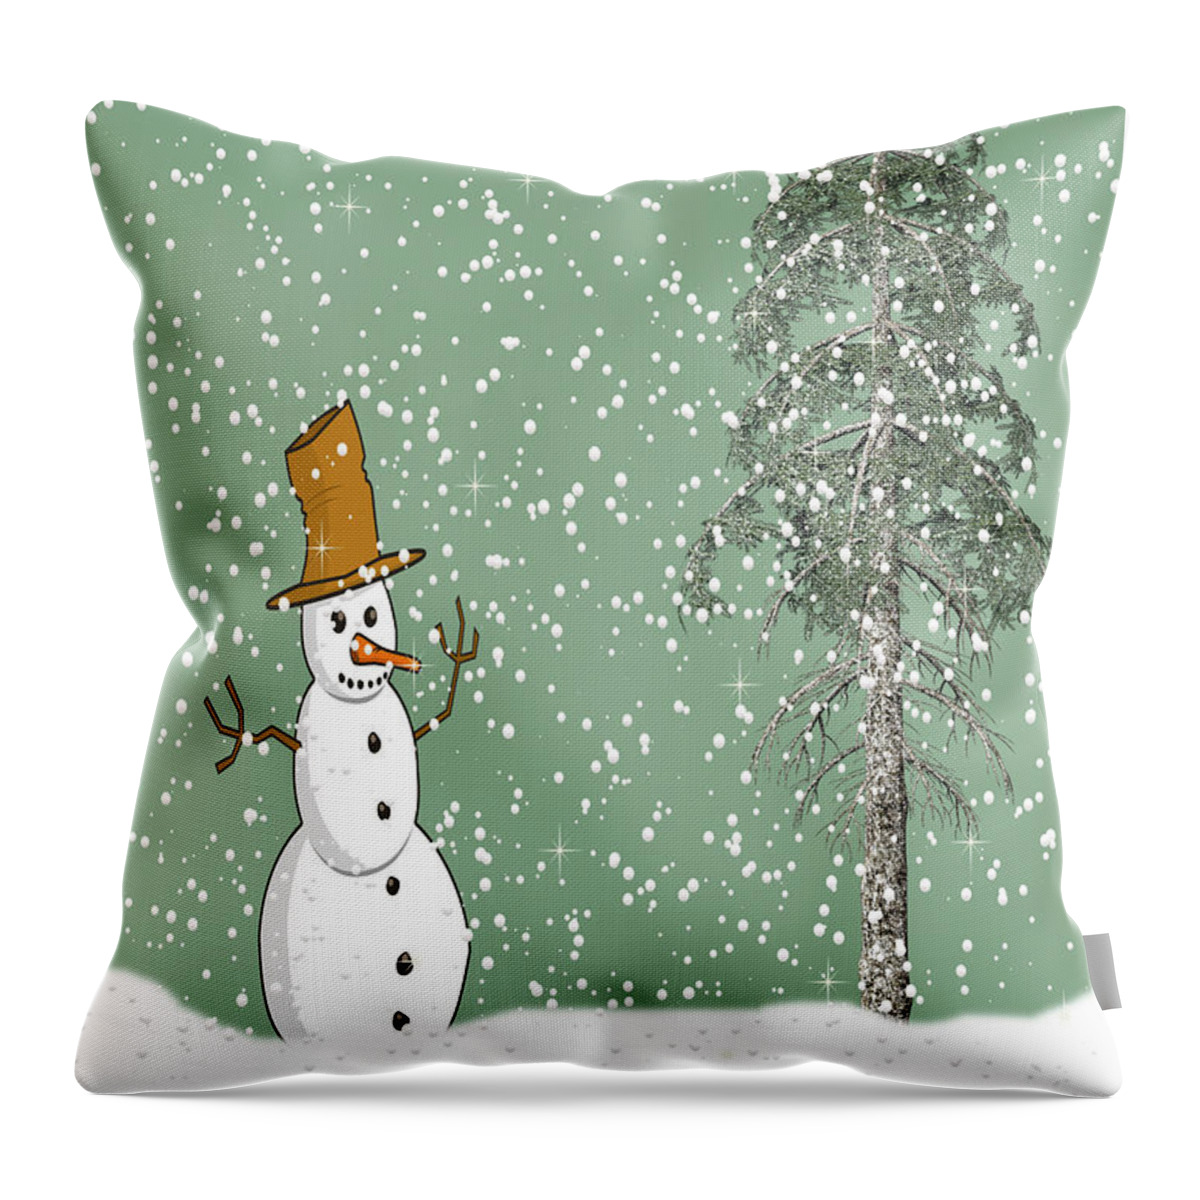 Snowman Throw Pillow featuring the mixed media Winter Scene With Snowman 5 by David Dehner